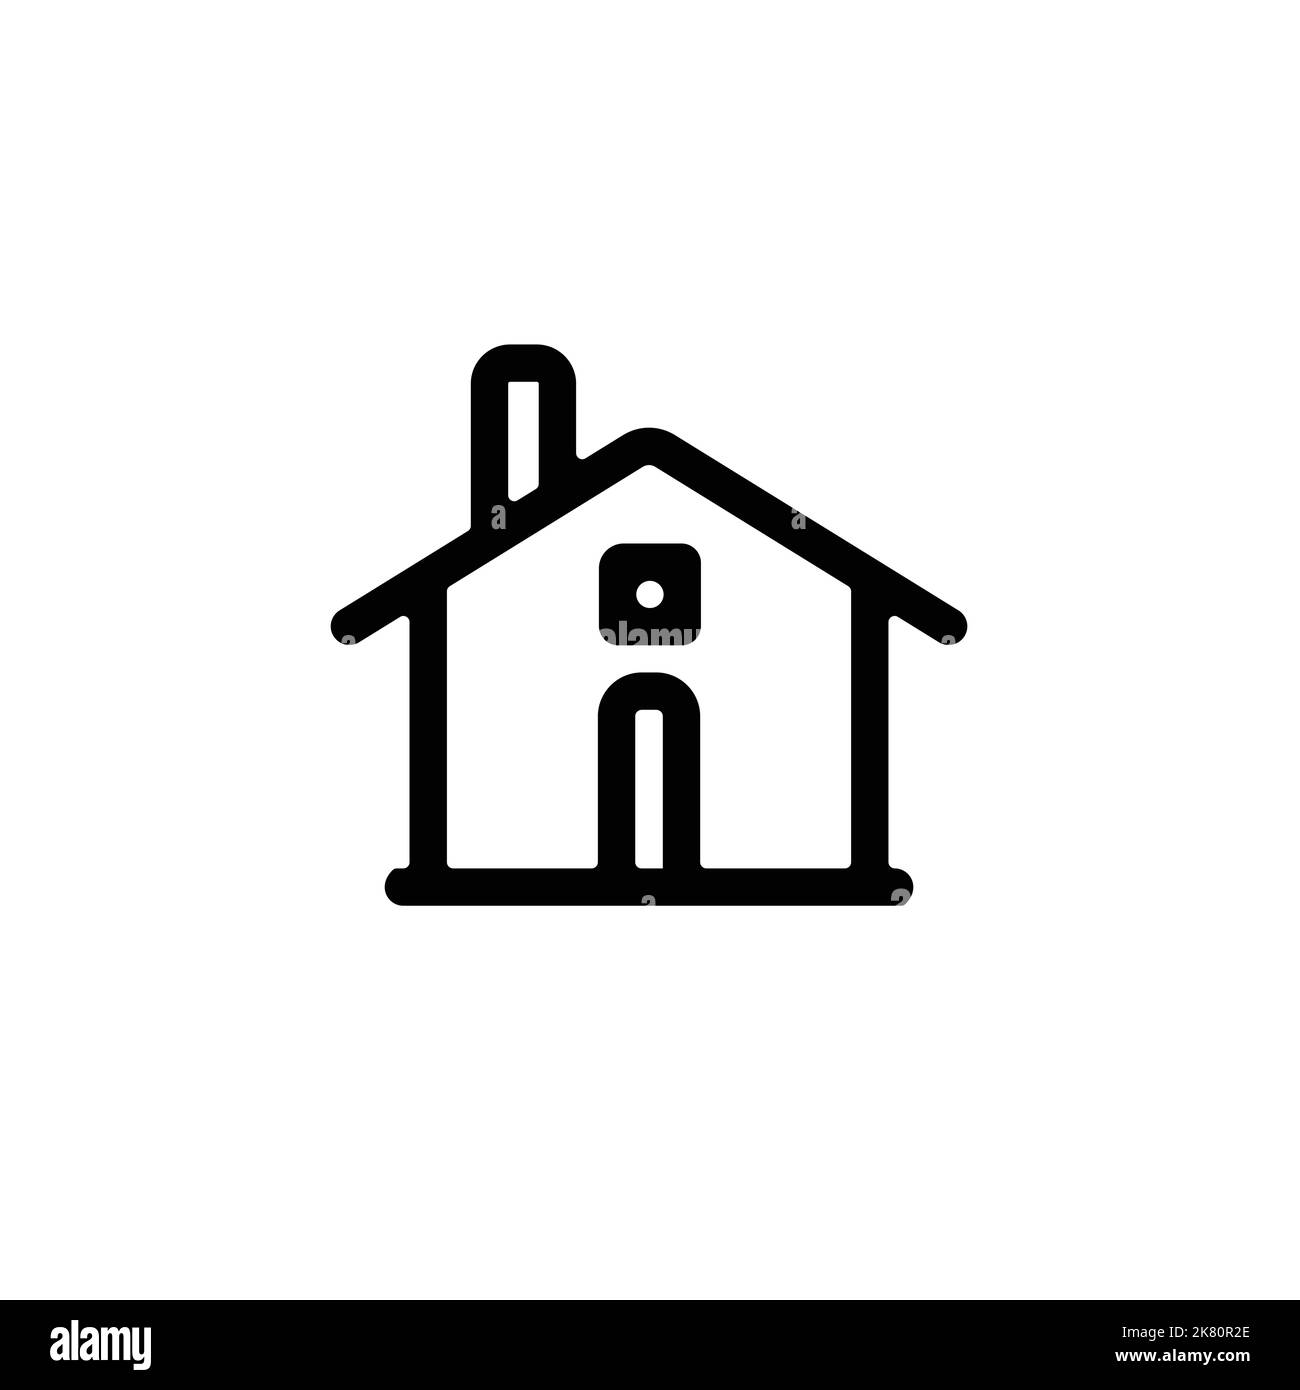 home , address icon, logo type in outline shape vector illustration on white isolated background. Stock Vector